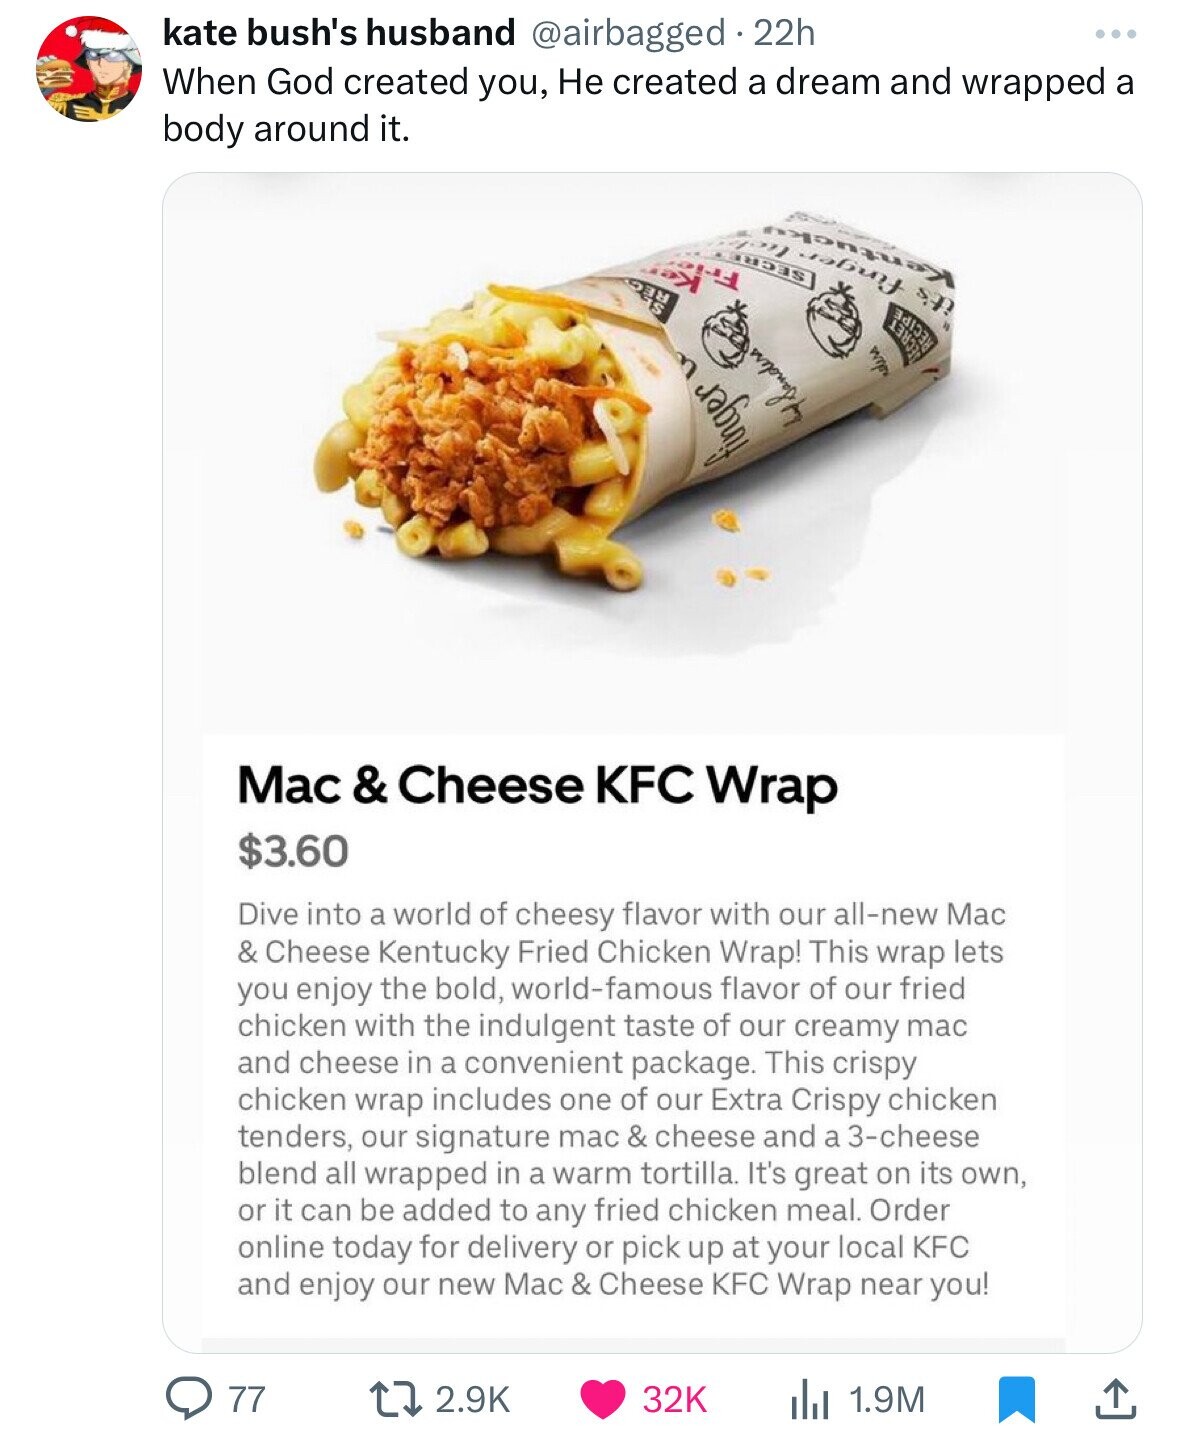 food - kate bush's husband 22h When God created you, He created a dream and wrapped a body around it. 77 45 Pe unger. E Mac & Cheese Kfc Wrap $3.60 Dive into a world of cheesy flavor with our allnew Mac & Cheese Kentucky Fried Chicken Wrap! This wrap lets